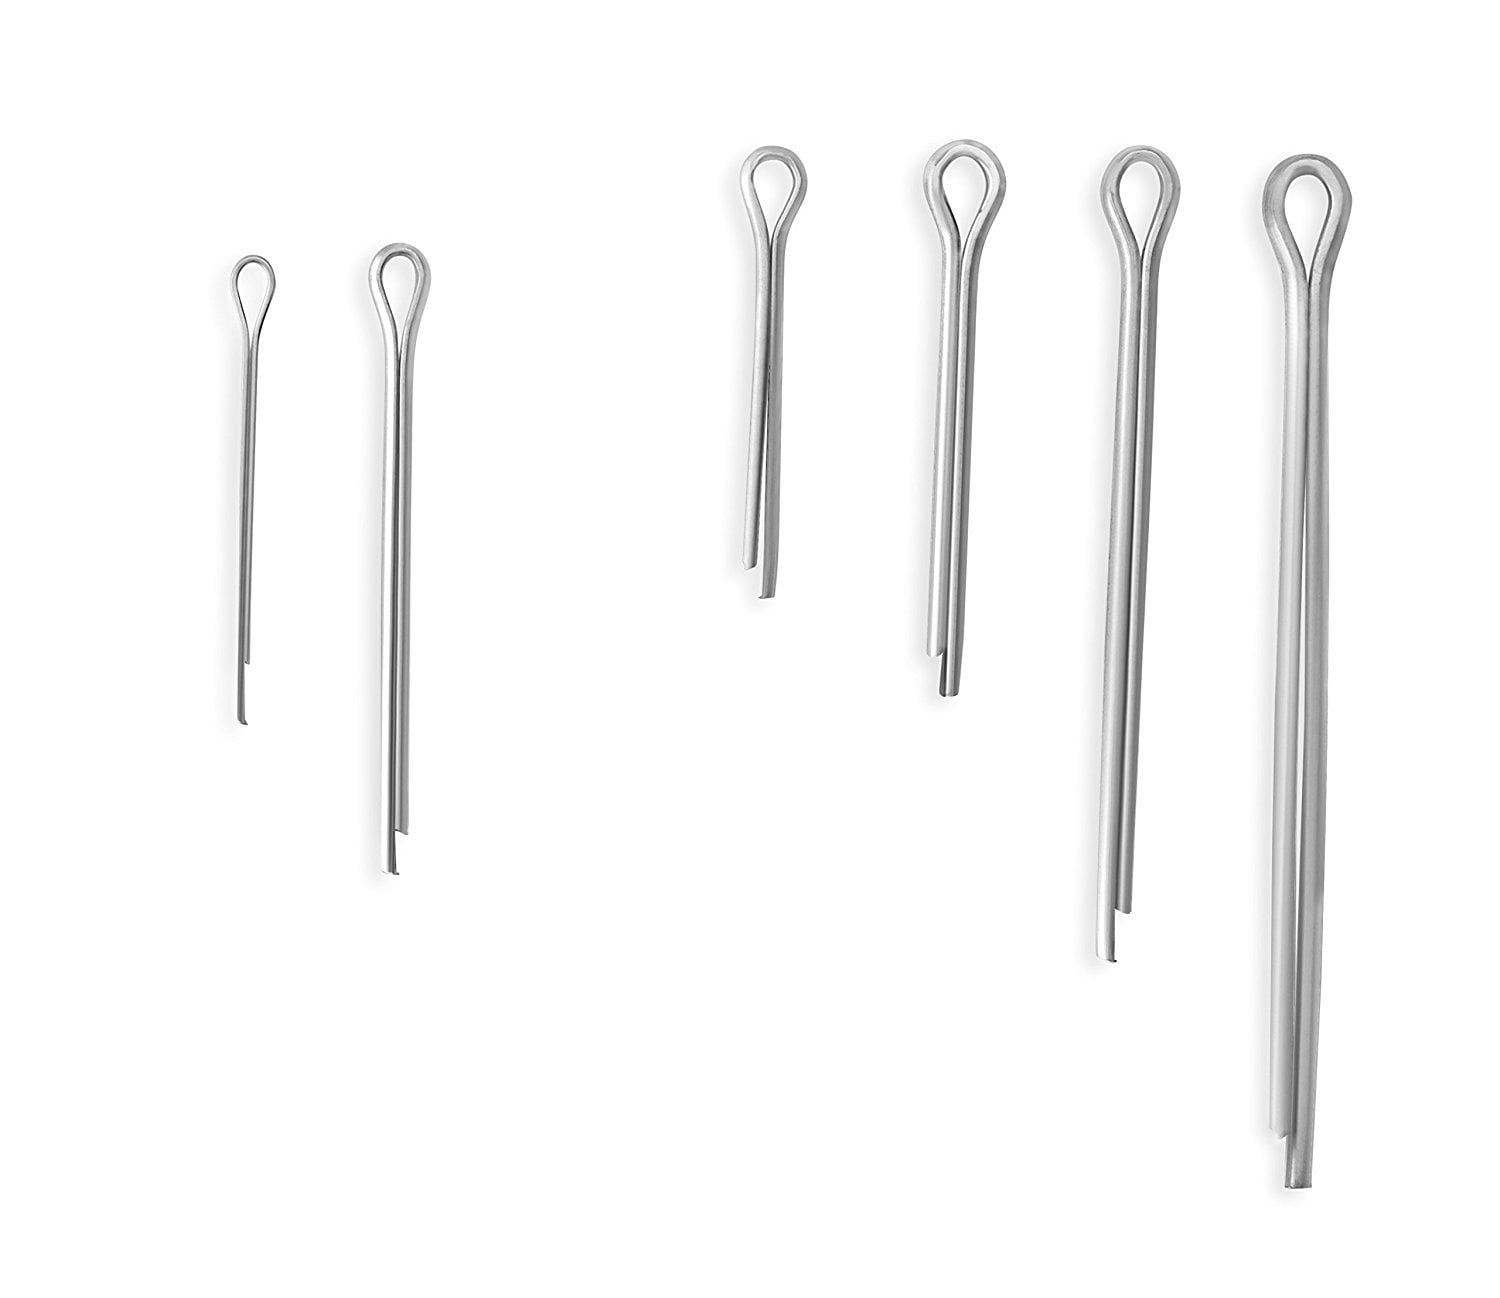 Mechanics Heavy Duty Zinc-Plating Steel Hair Pins By Katzco Workshops Small Engine Repair Power Equipment Fastening Garages Trucks For Cars 150 Pieces Cotter Pin Lawn Mowers 